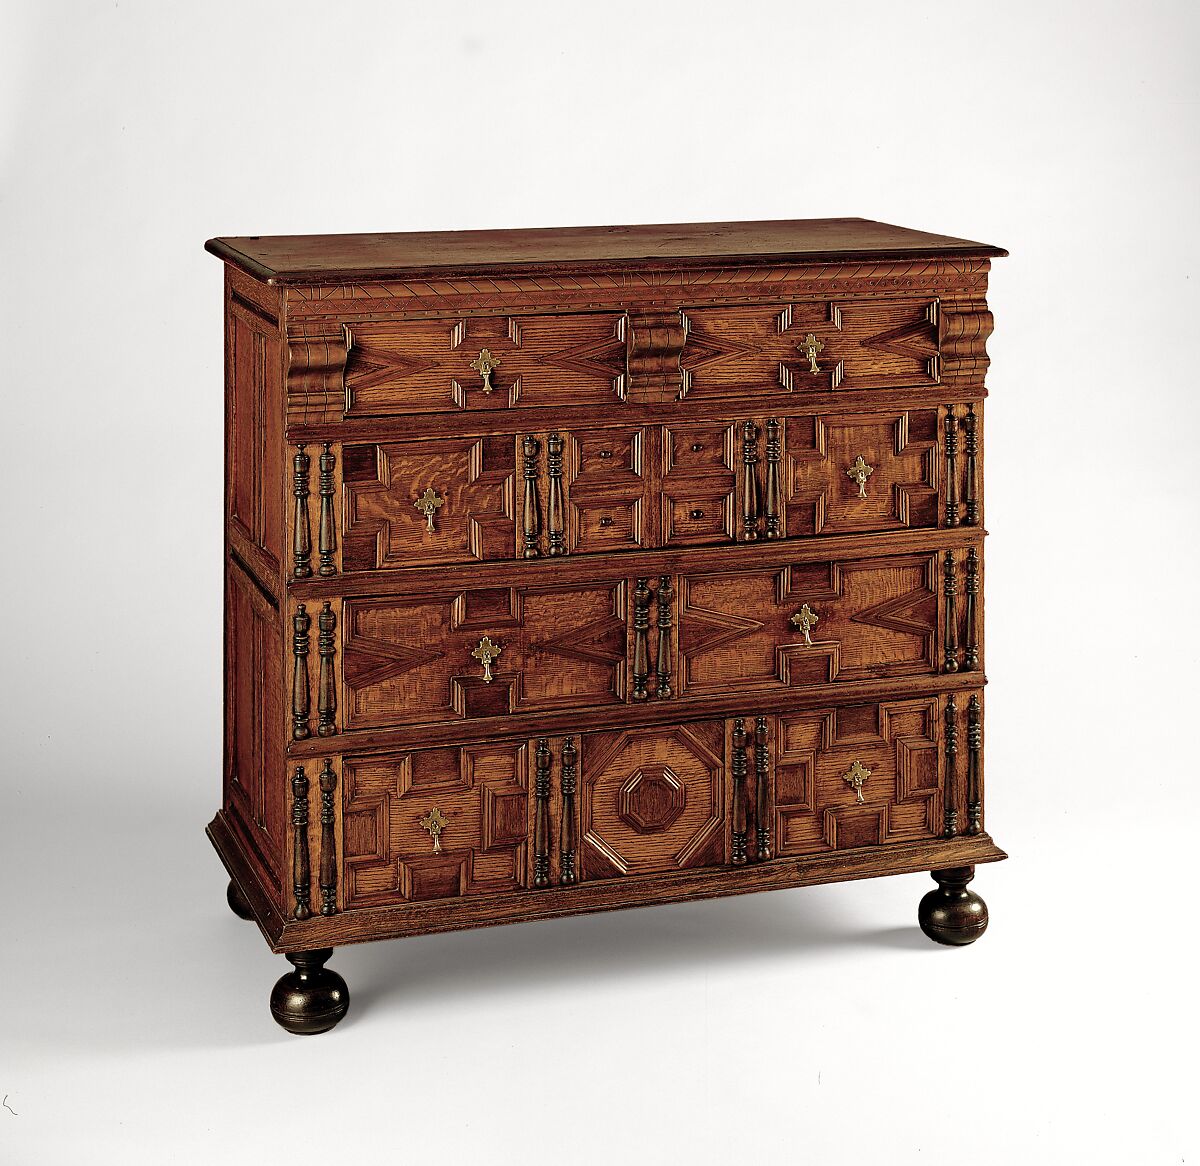 Chest of drawers, Attributed to The Symonds Shop Tradition, Red oak, walnut, cedar, maple, white pine, American 